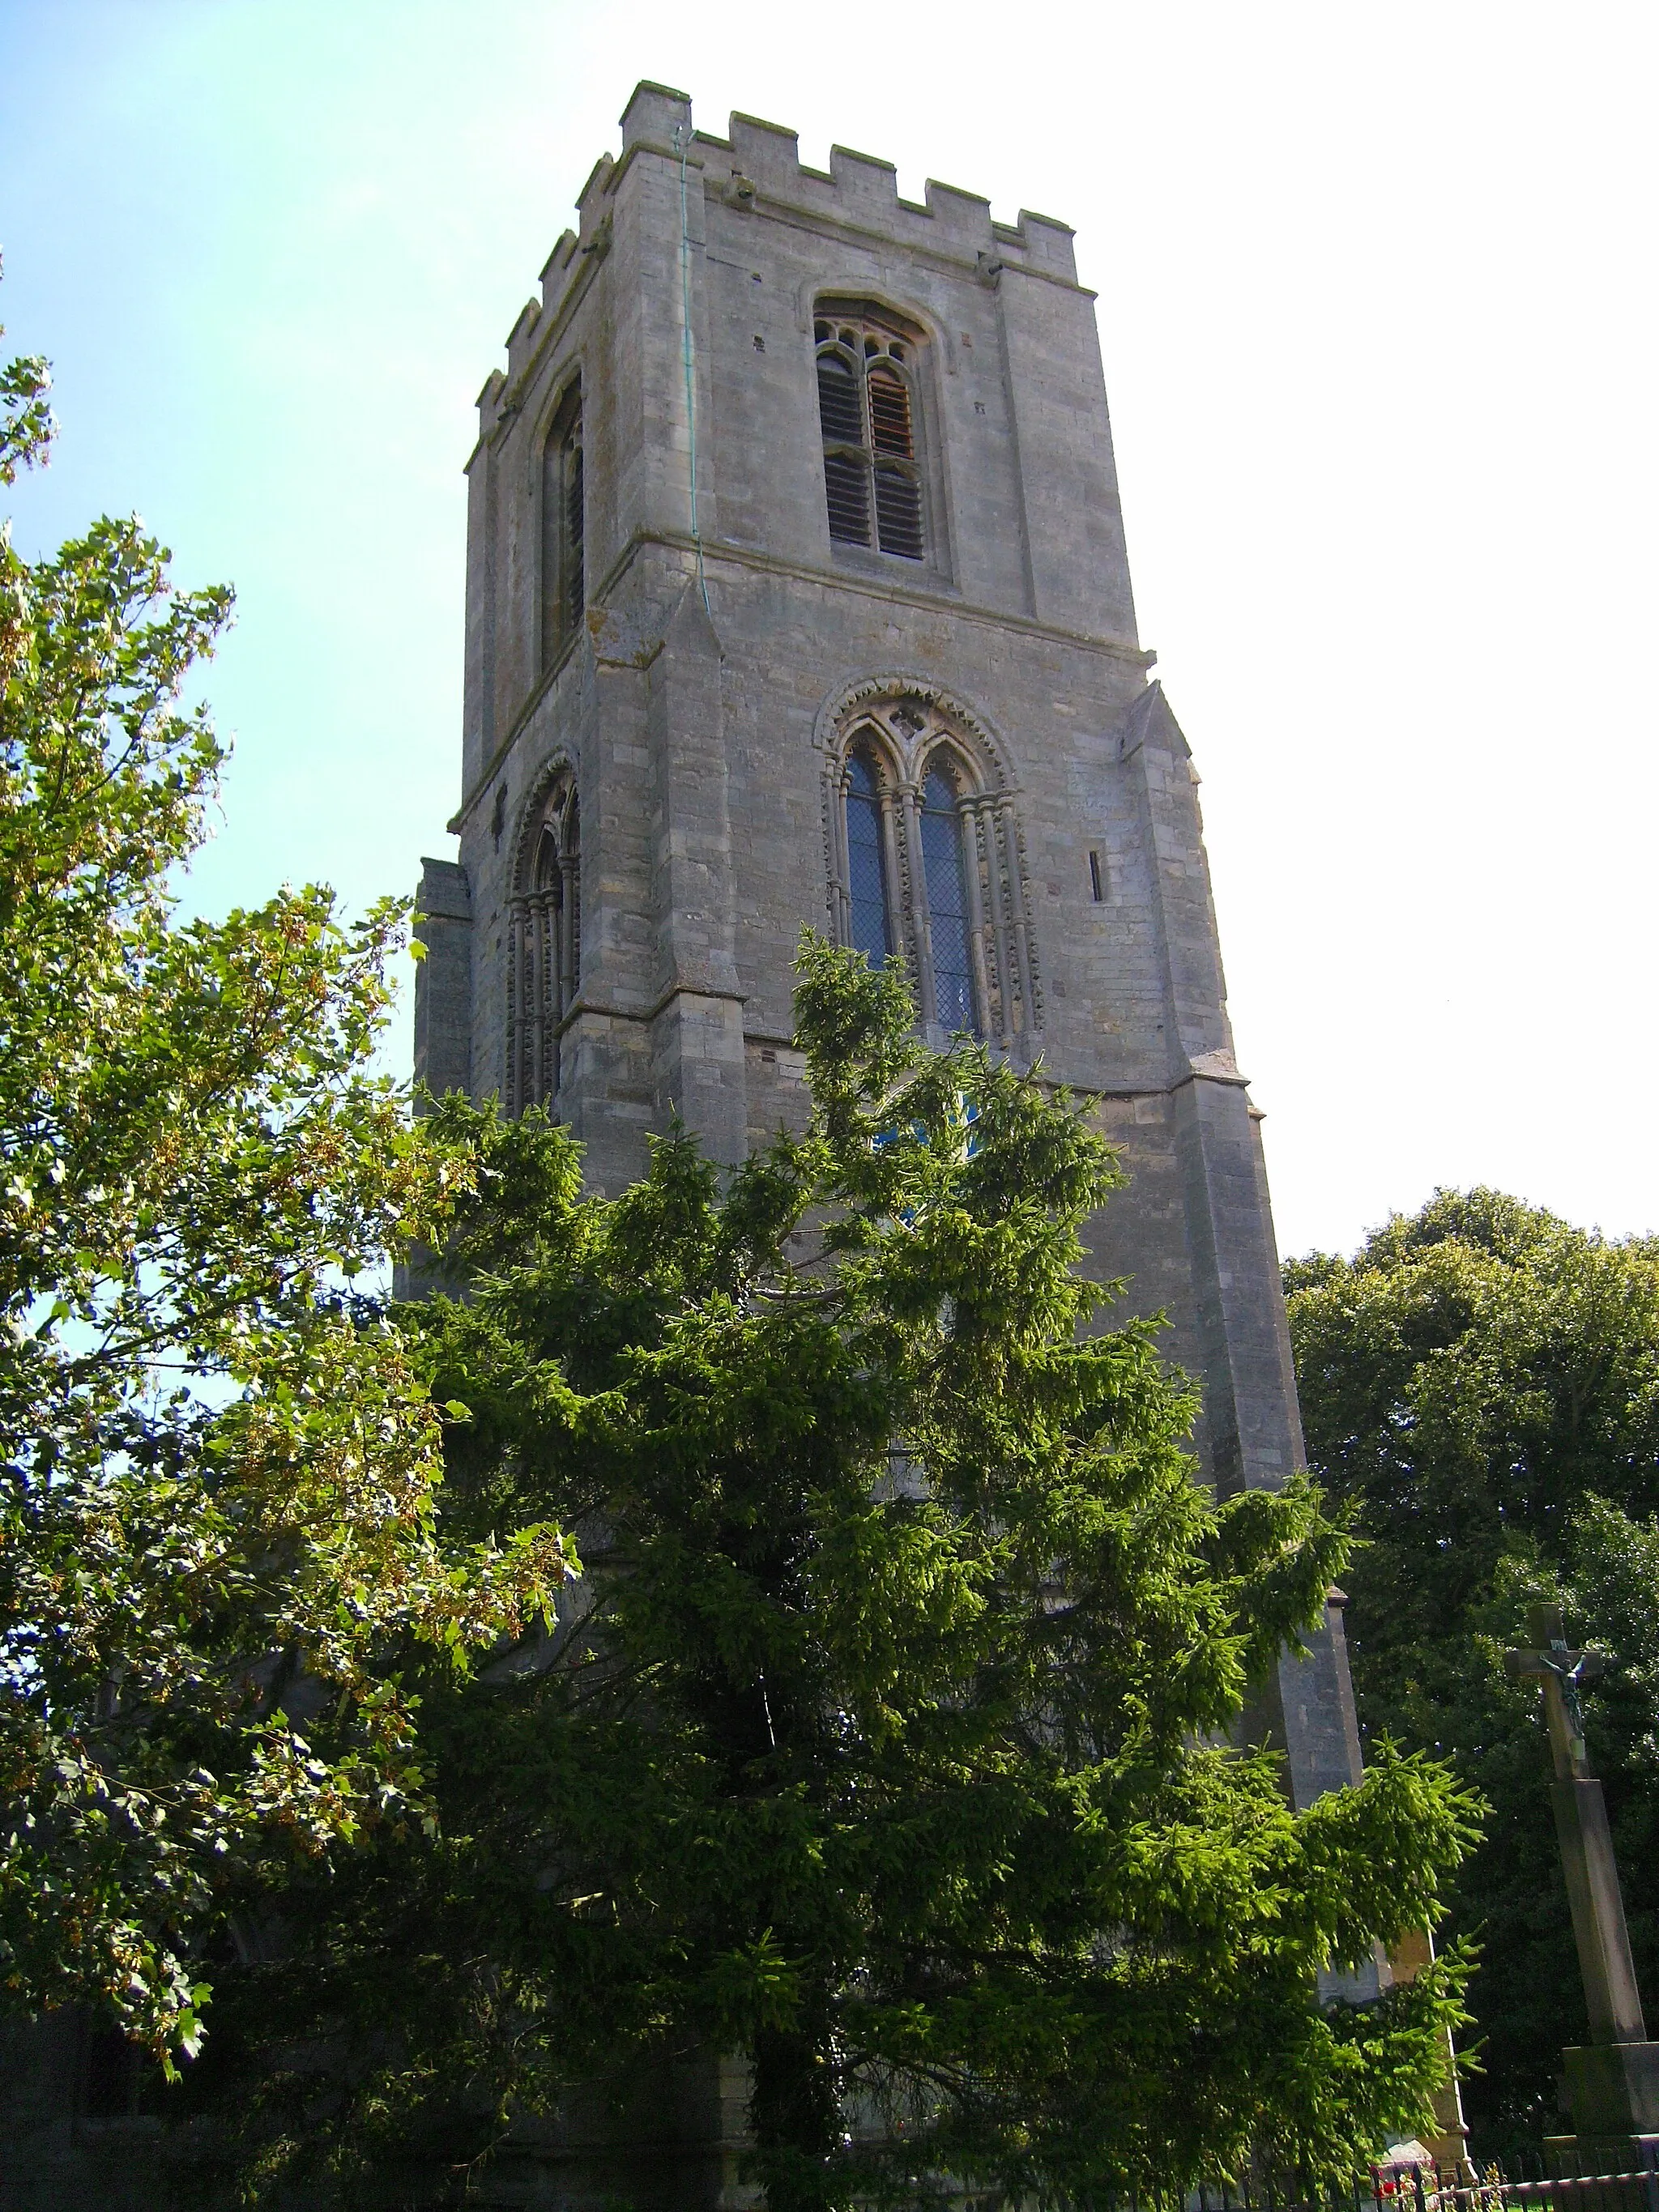 Photo showing: Western tower, St Margaret's church, Sibsey, Lincolnshire, UK